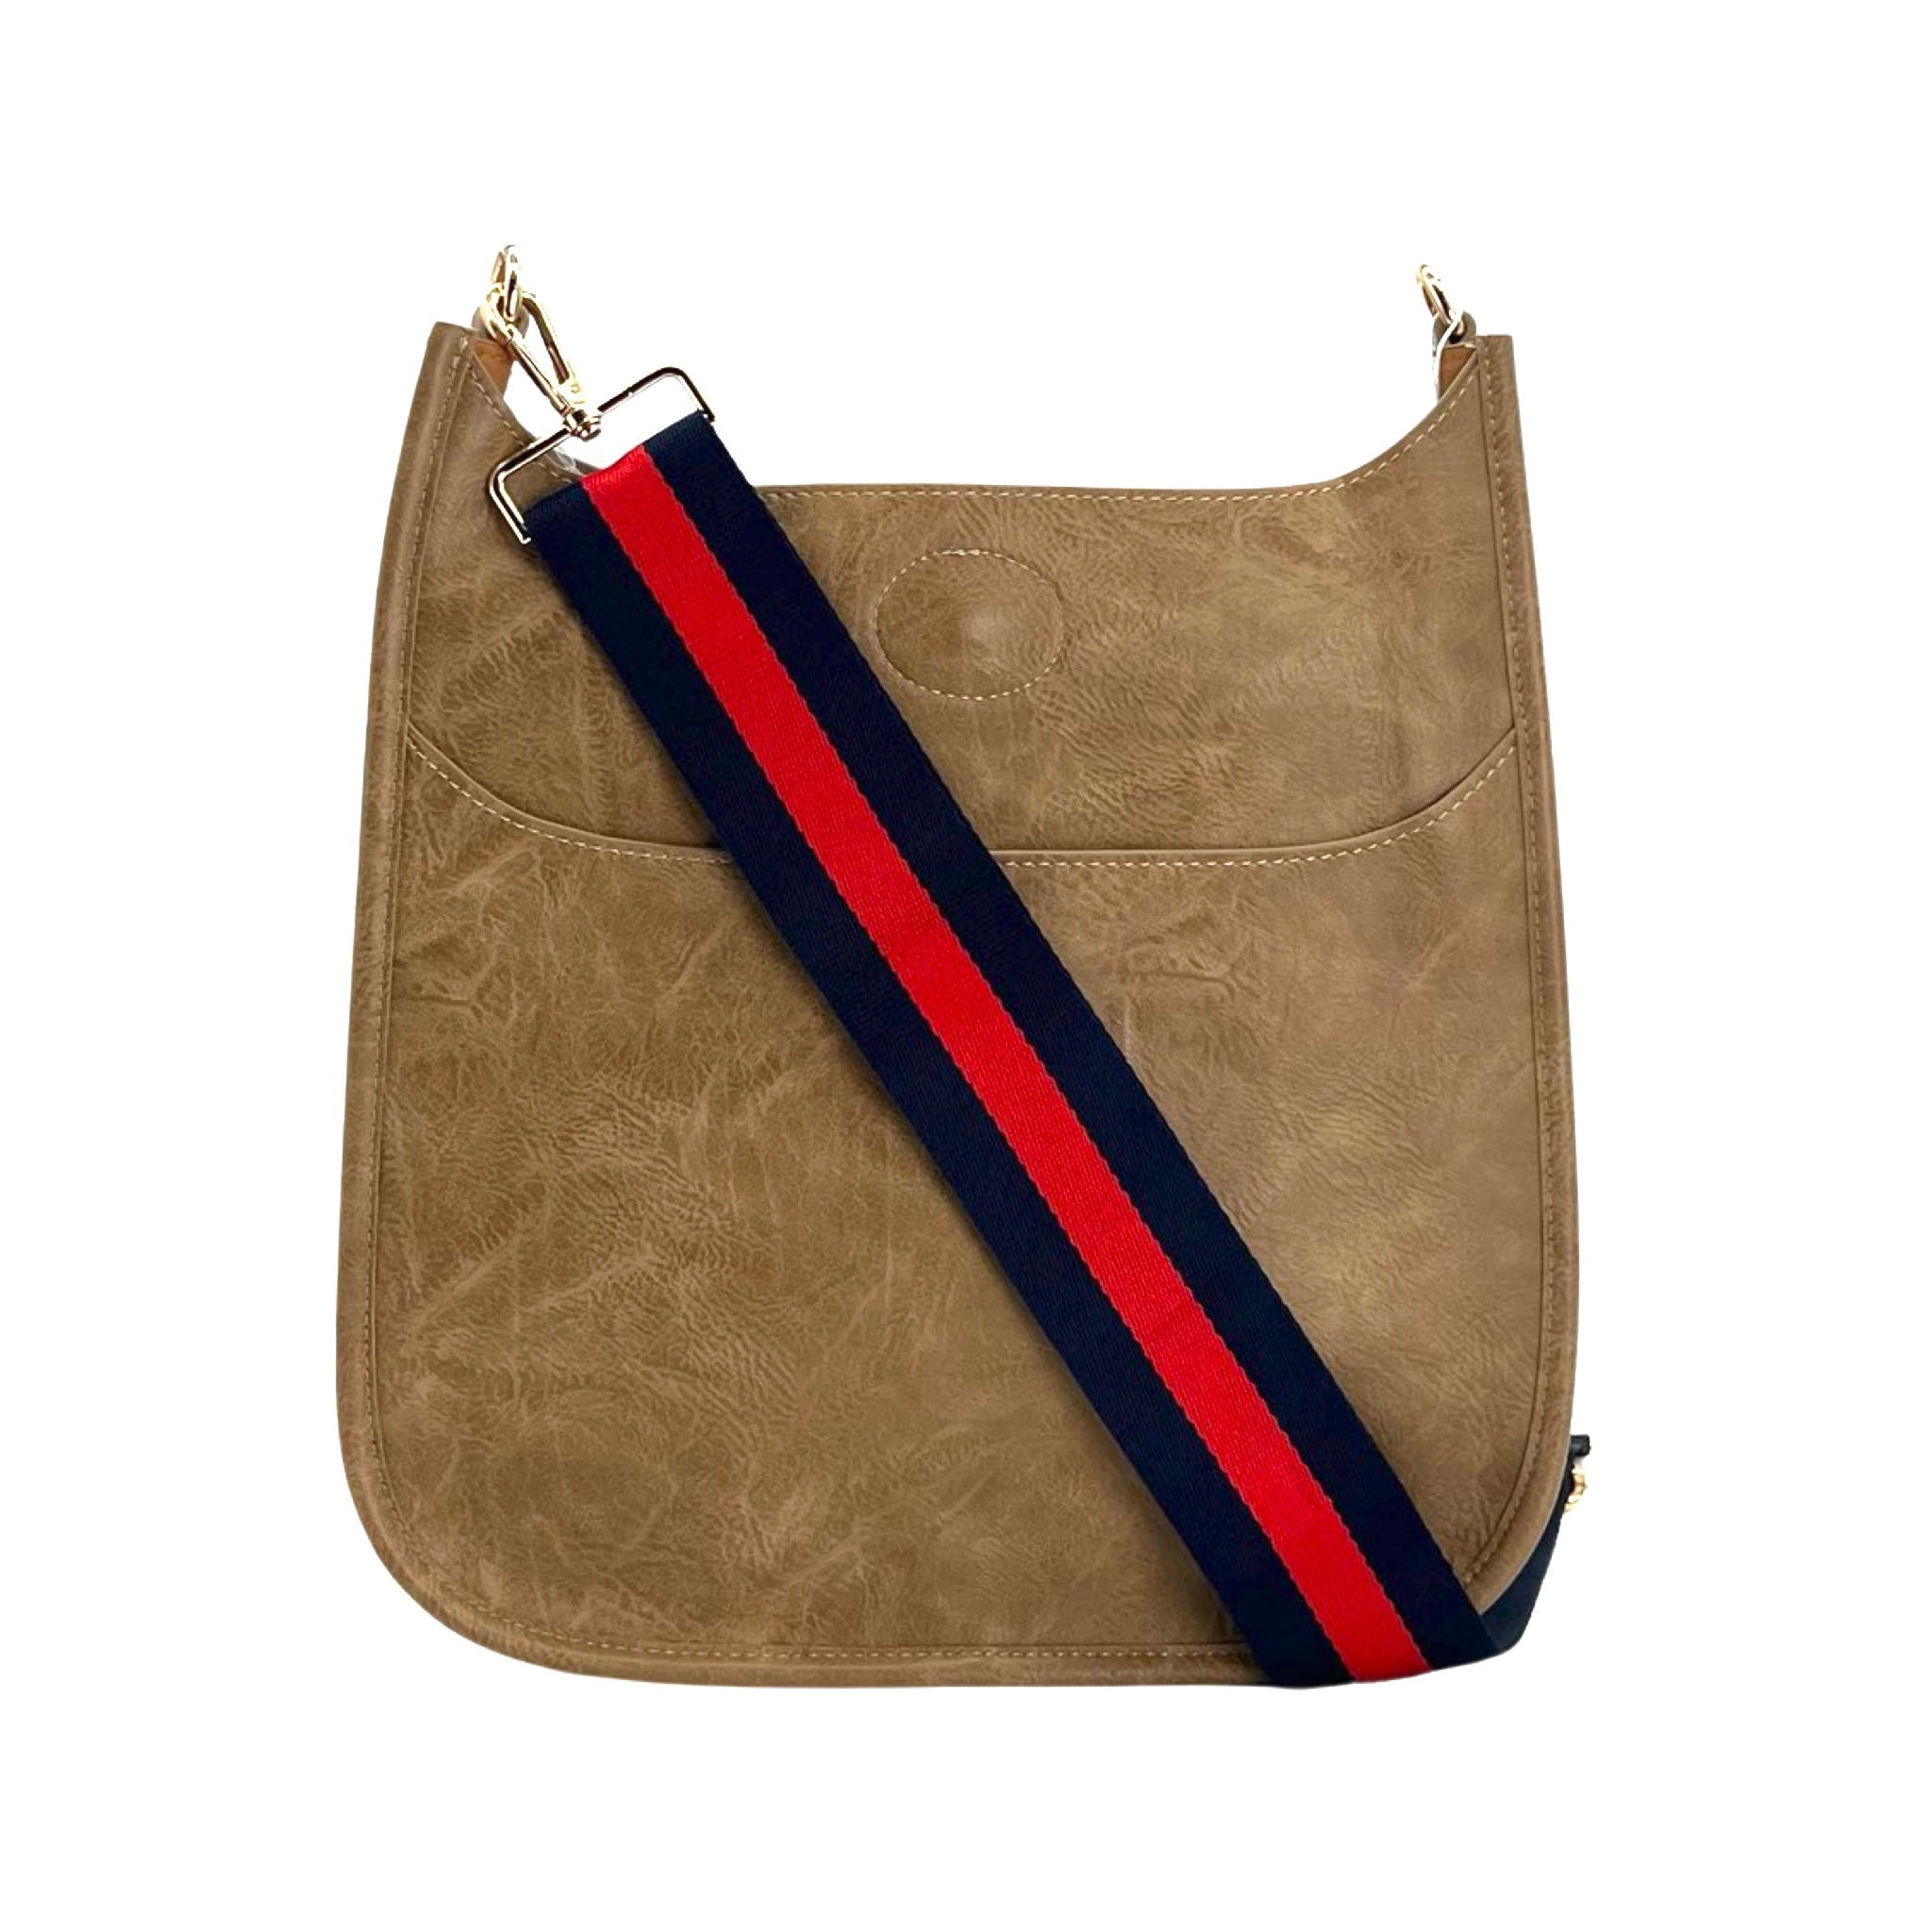 DUAL STRIPED GAMEDAY CANVAS ADJUSTABLE BAG STRAPS -22 COLORS